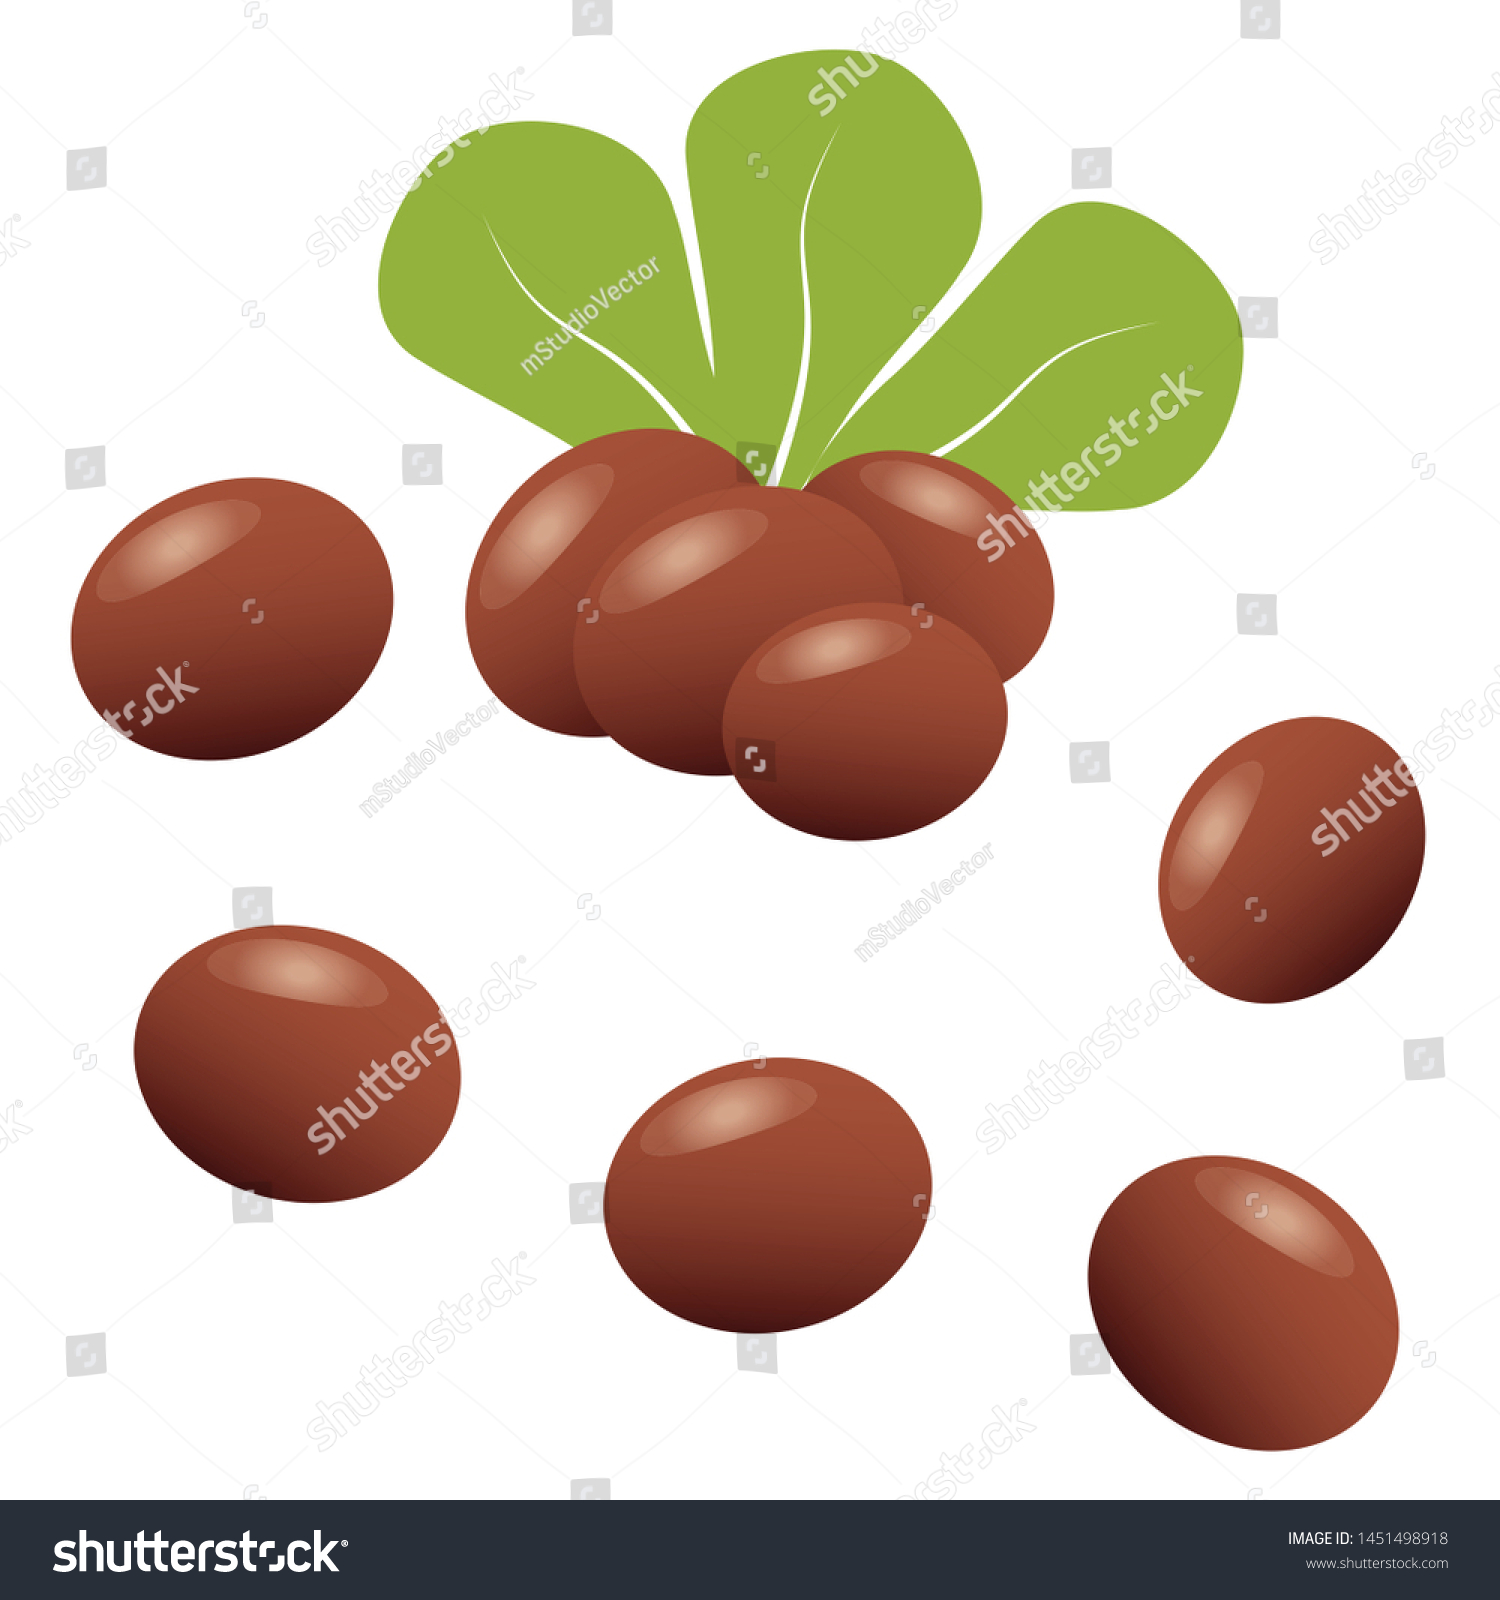 SVG of Shea butter. Shea nuts with green leaves svg